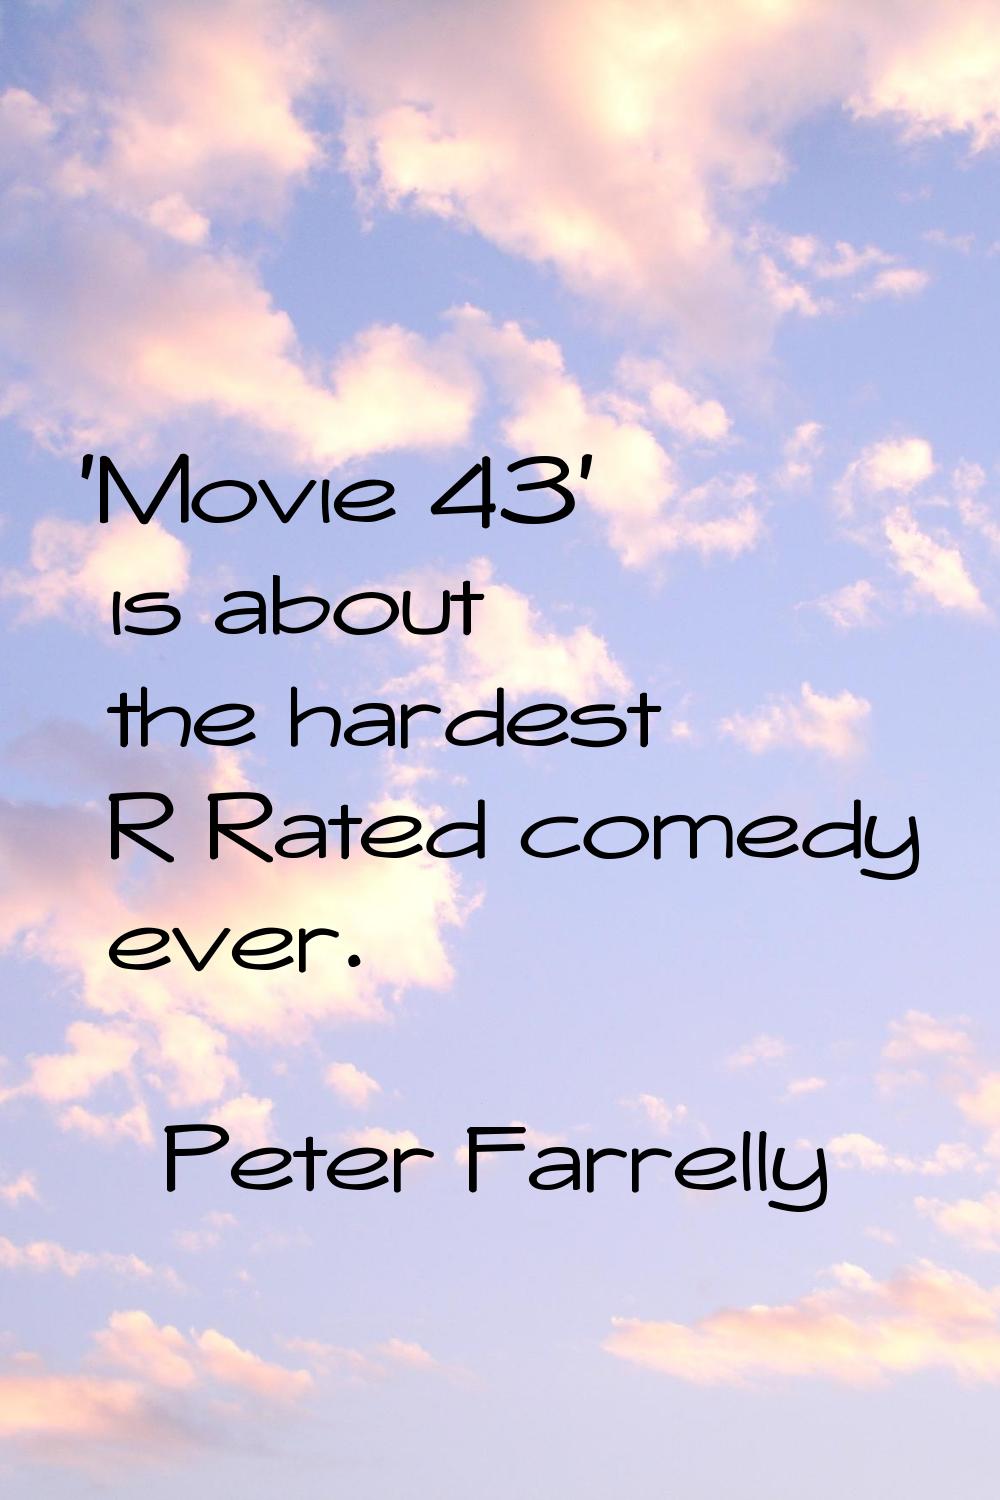 'Movie 43' is about the hardest R Rated comedy ever.